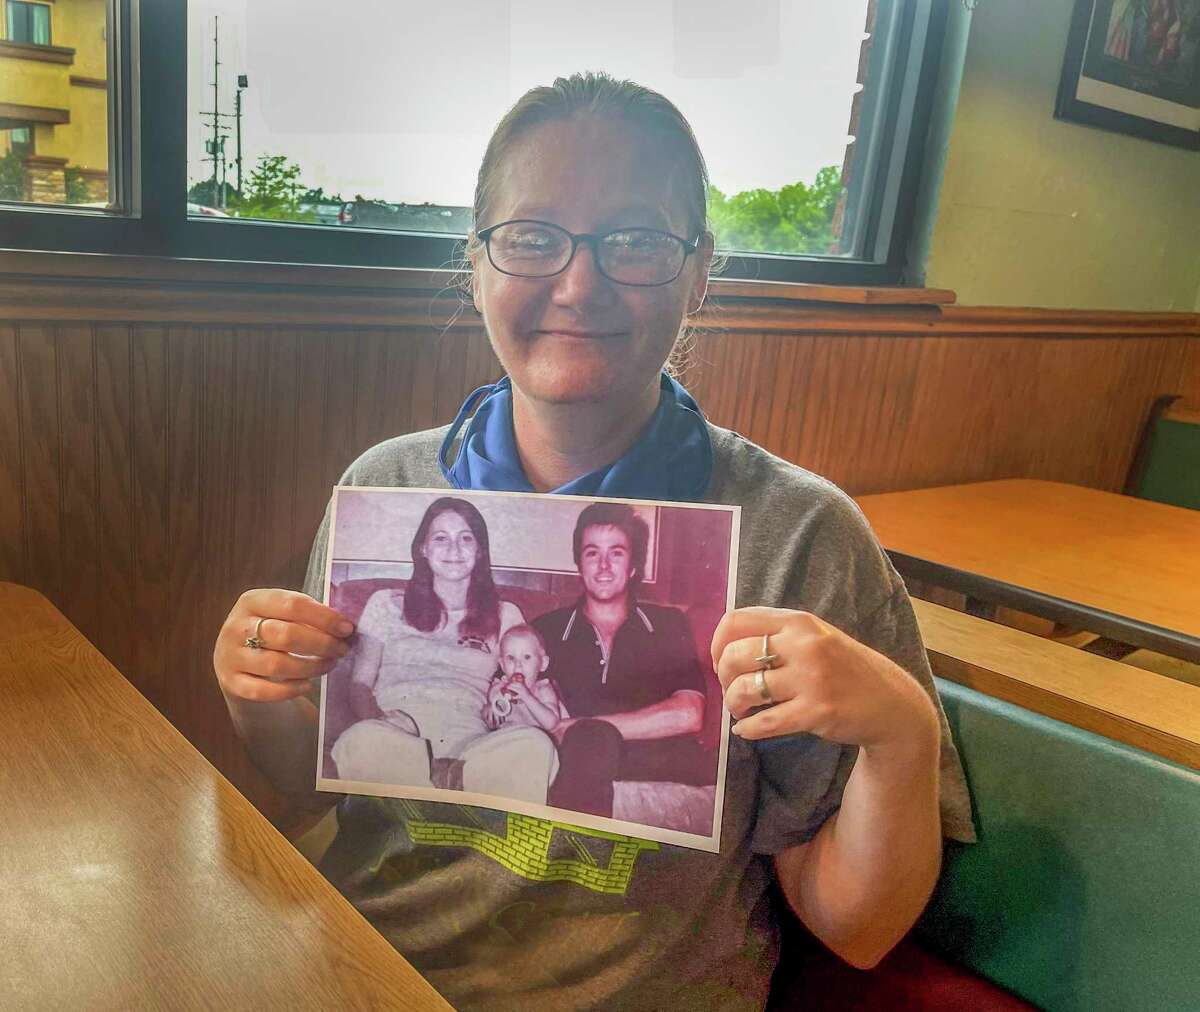 Holly Marie holds a picture of herself as a baby with her late parents, Harold Dean Clouse and Tina Gail Linn.